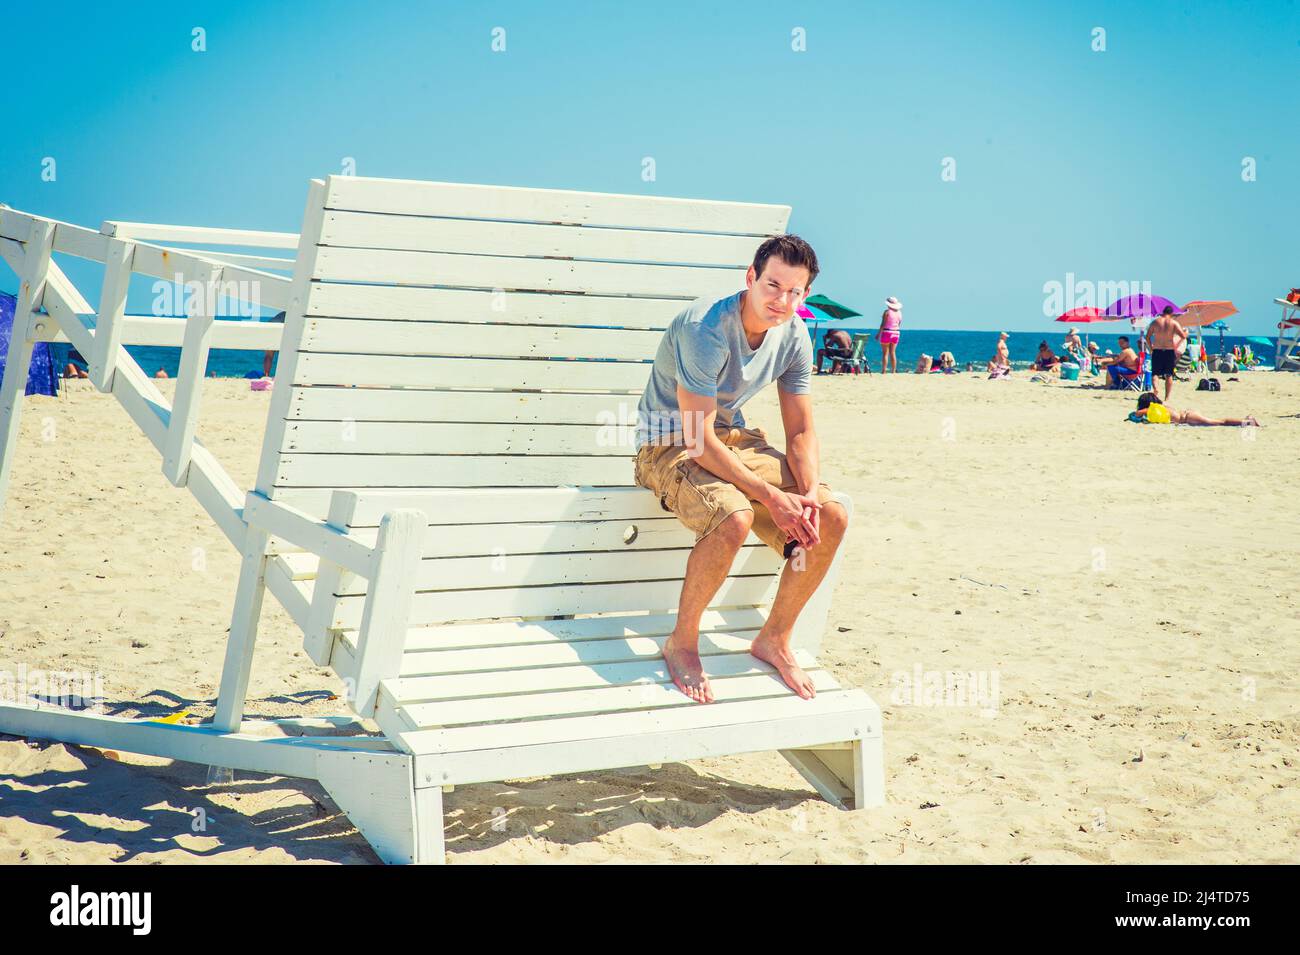 People on the Beach. Wearing a gray t shirt, dark yellow shorts, barefoot, bending back over, holding hands, a young handsome man is sitting on a wood Stock Photo